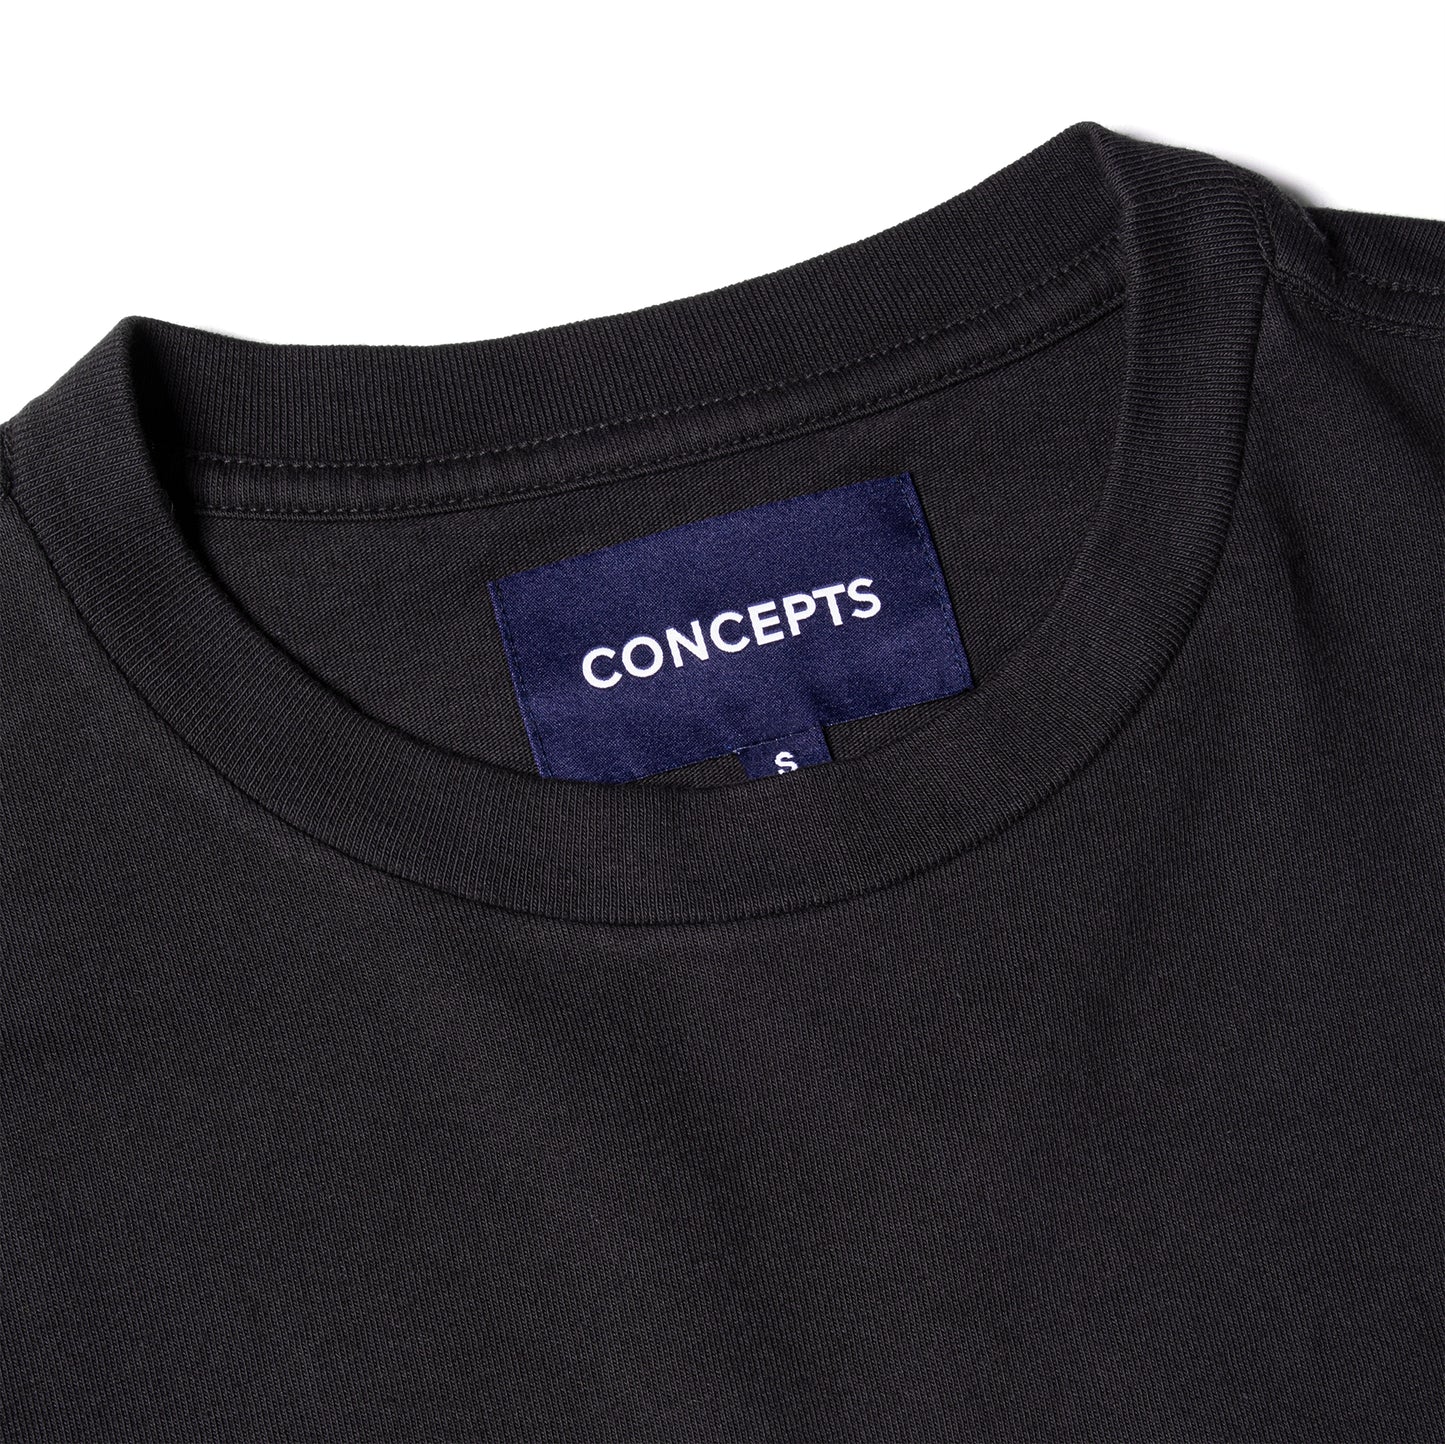 Concepts Tee (Washed Black)